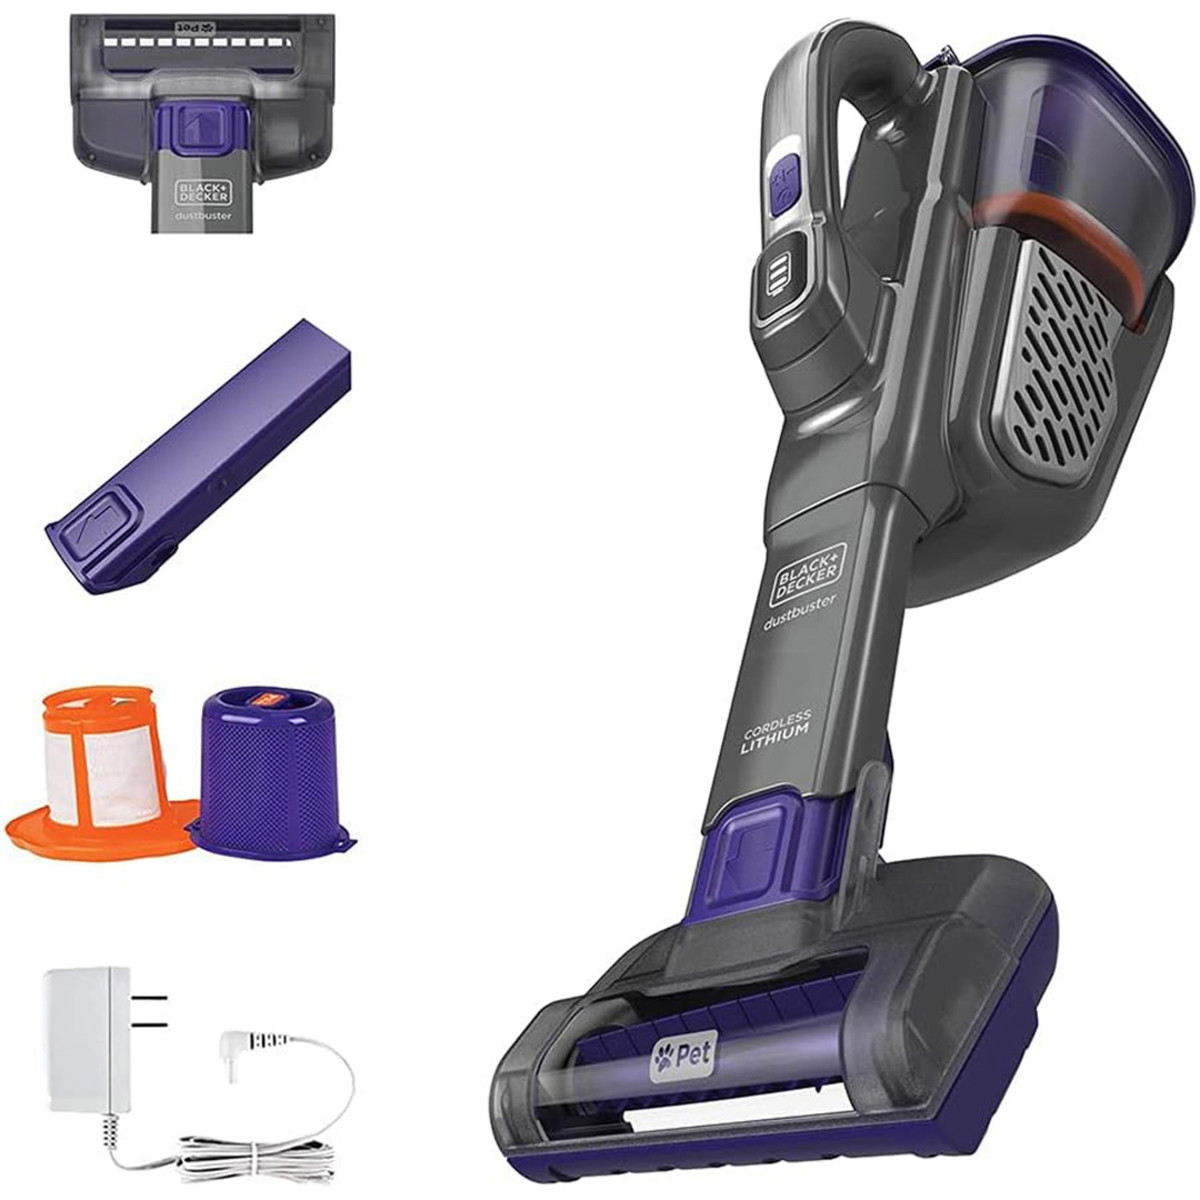 The Black+Decker Dustbuster Furbuster AdvancedClean+ Cordless Handheld Vacuum is on sale right now at Amazon